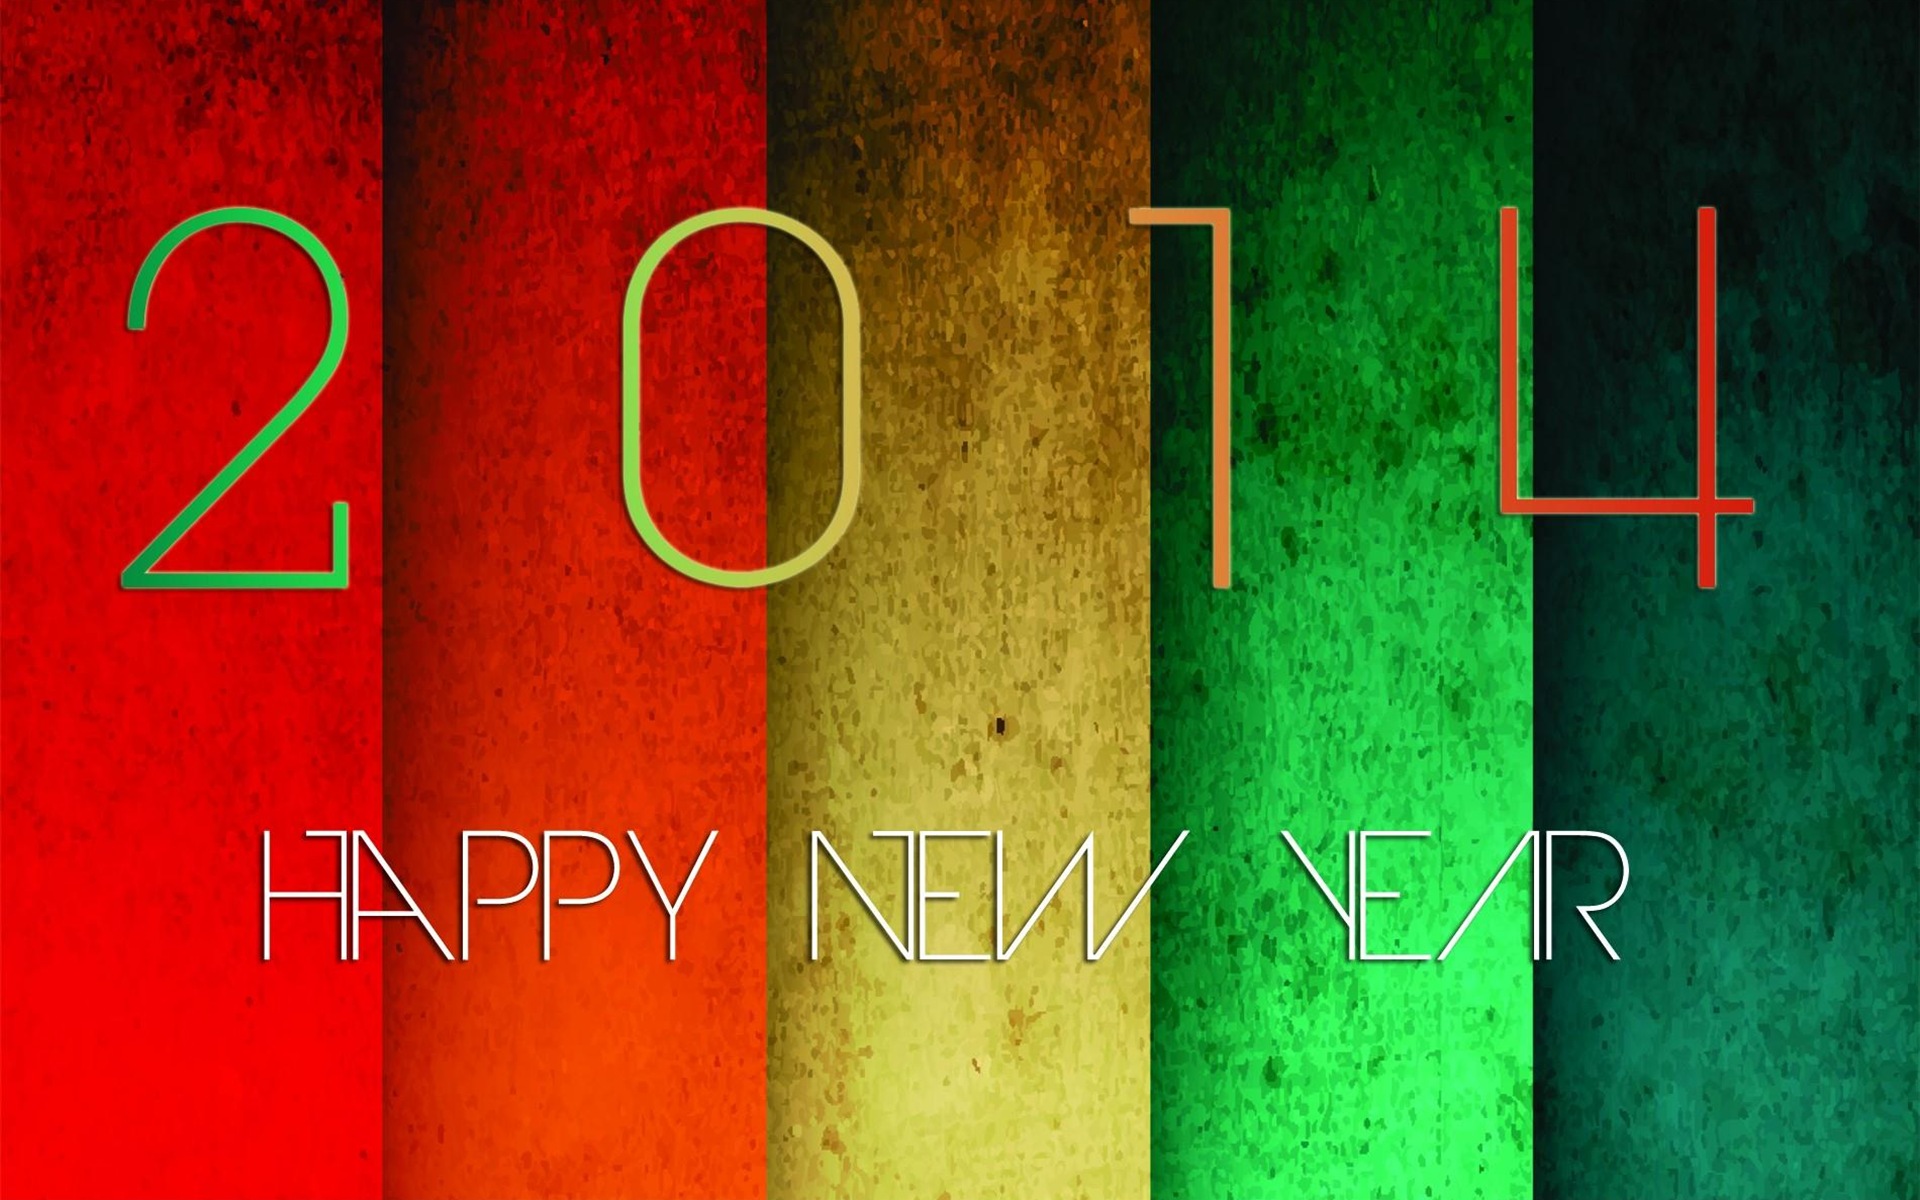 2014 New Year Theme HD Wallpapers (2) #3 - 1920x1200